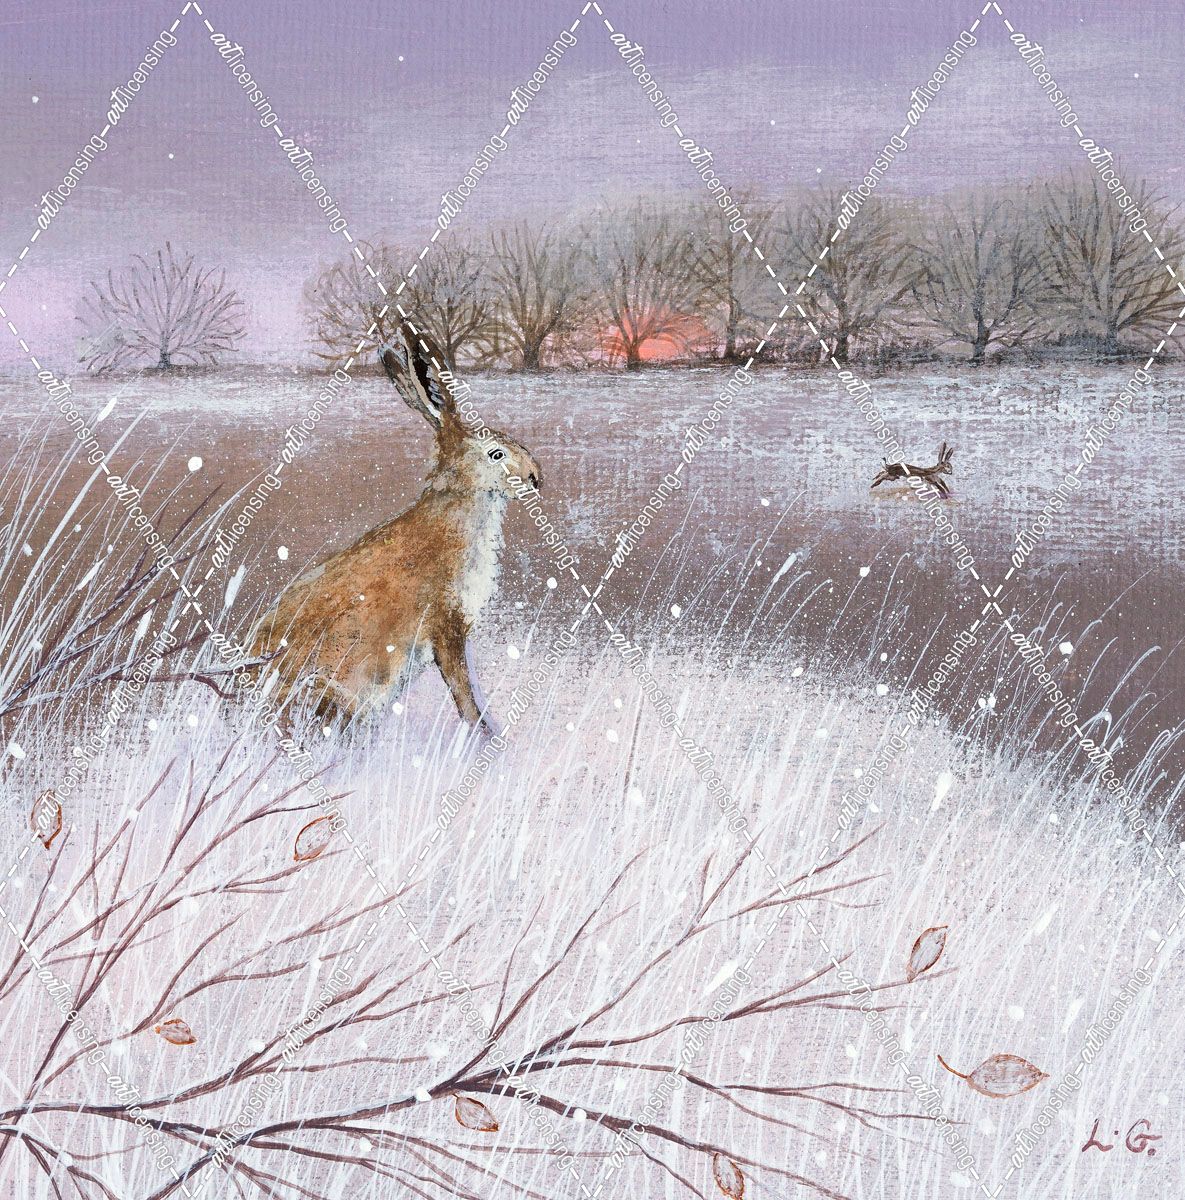 Frosty Landscape and Hare